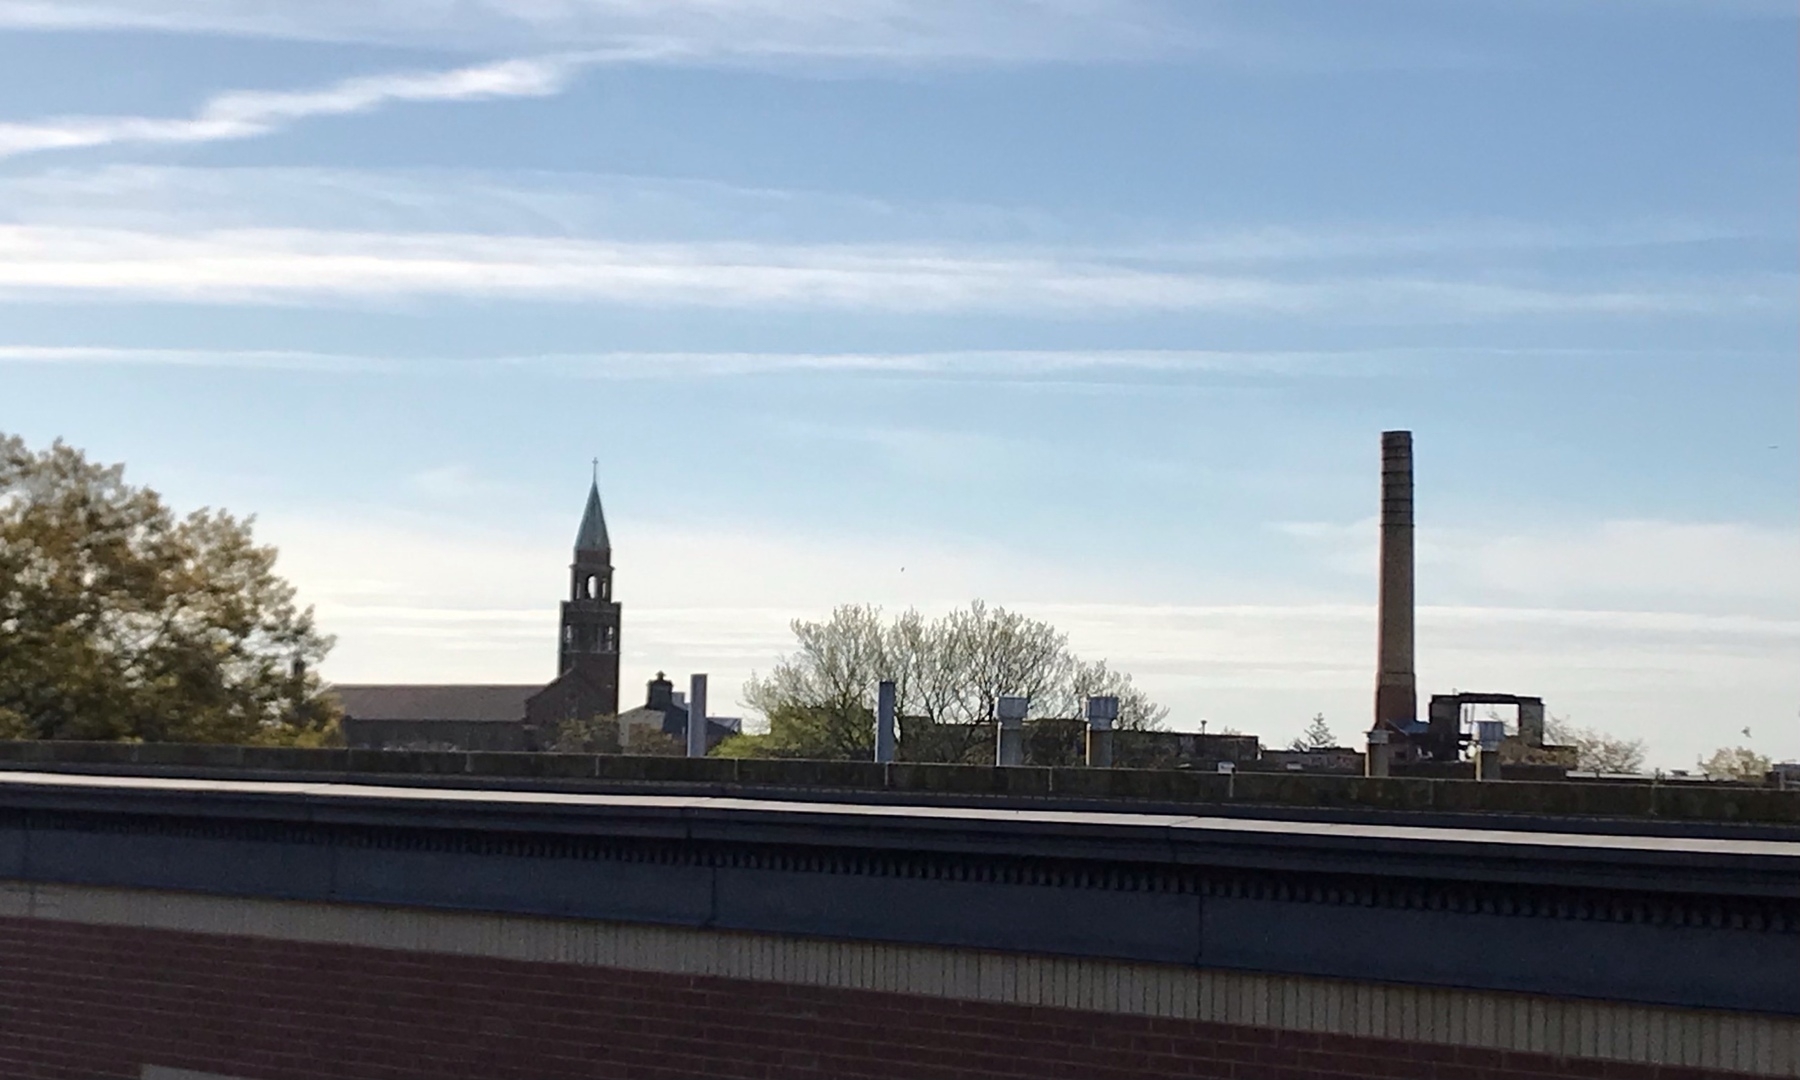 Landscape photo with church steeple and smokestack standing out against the horizon, viewed across the top of a building